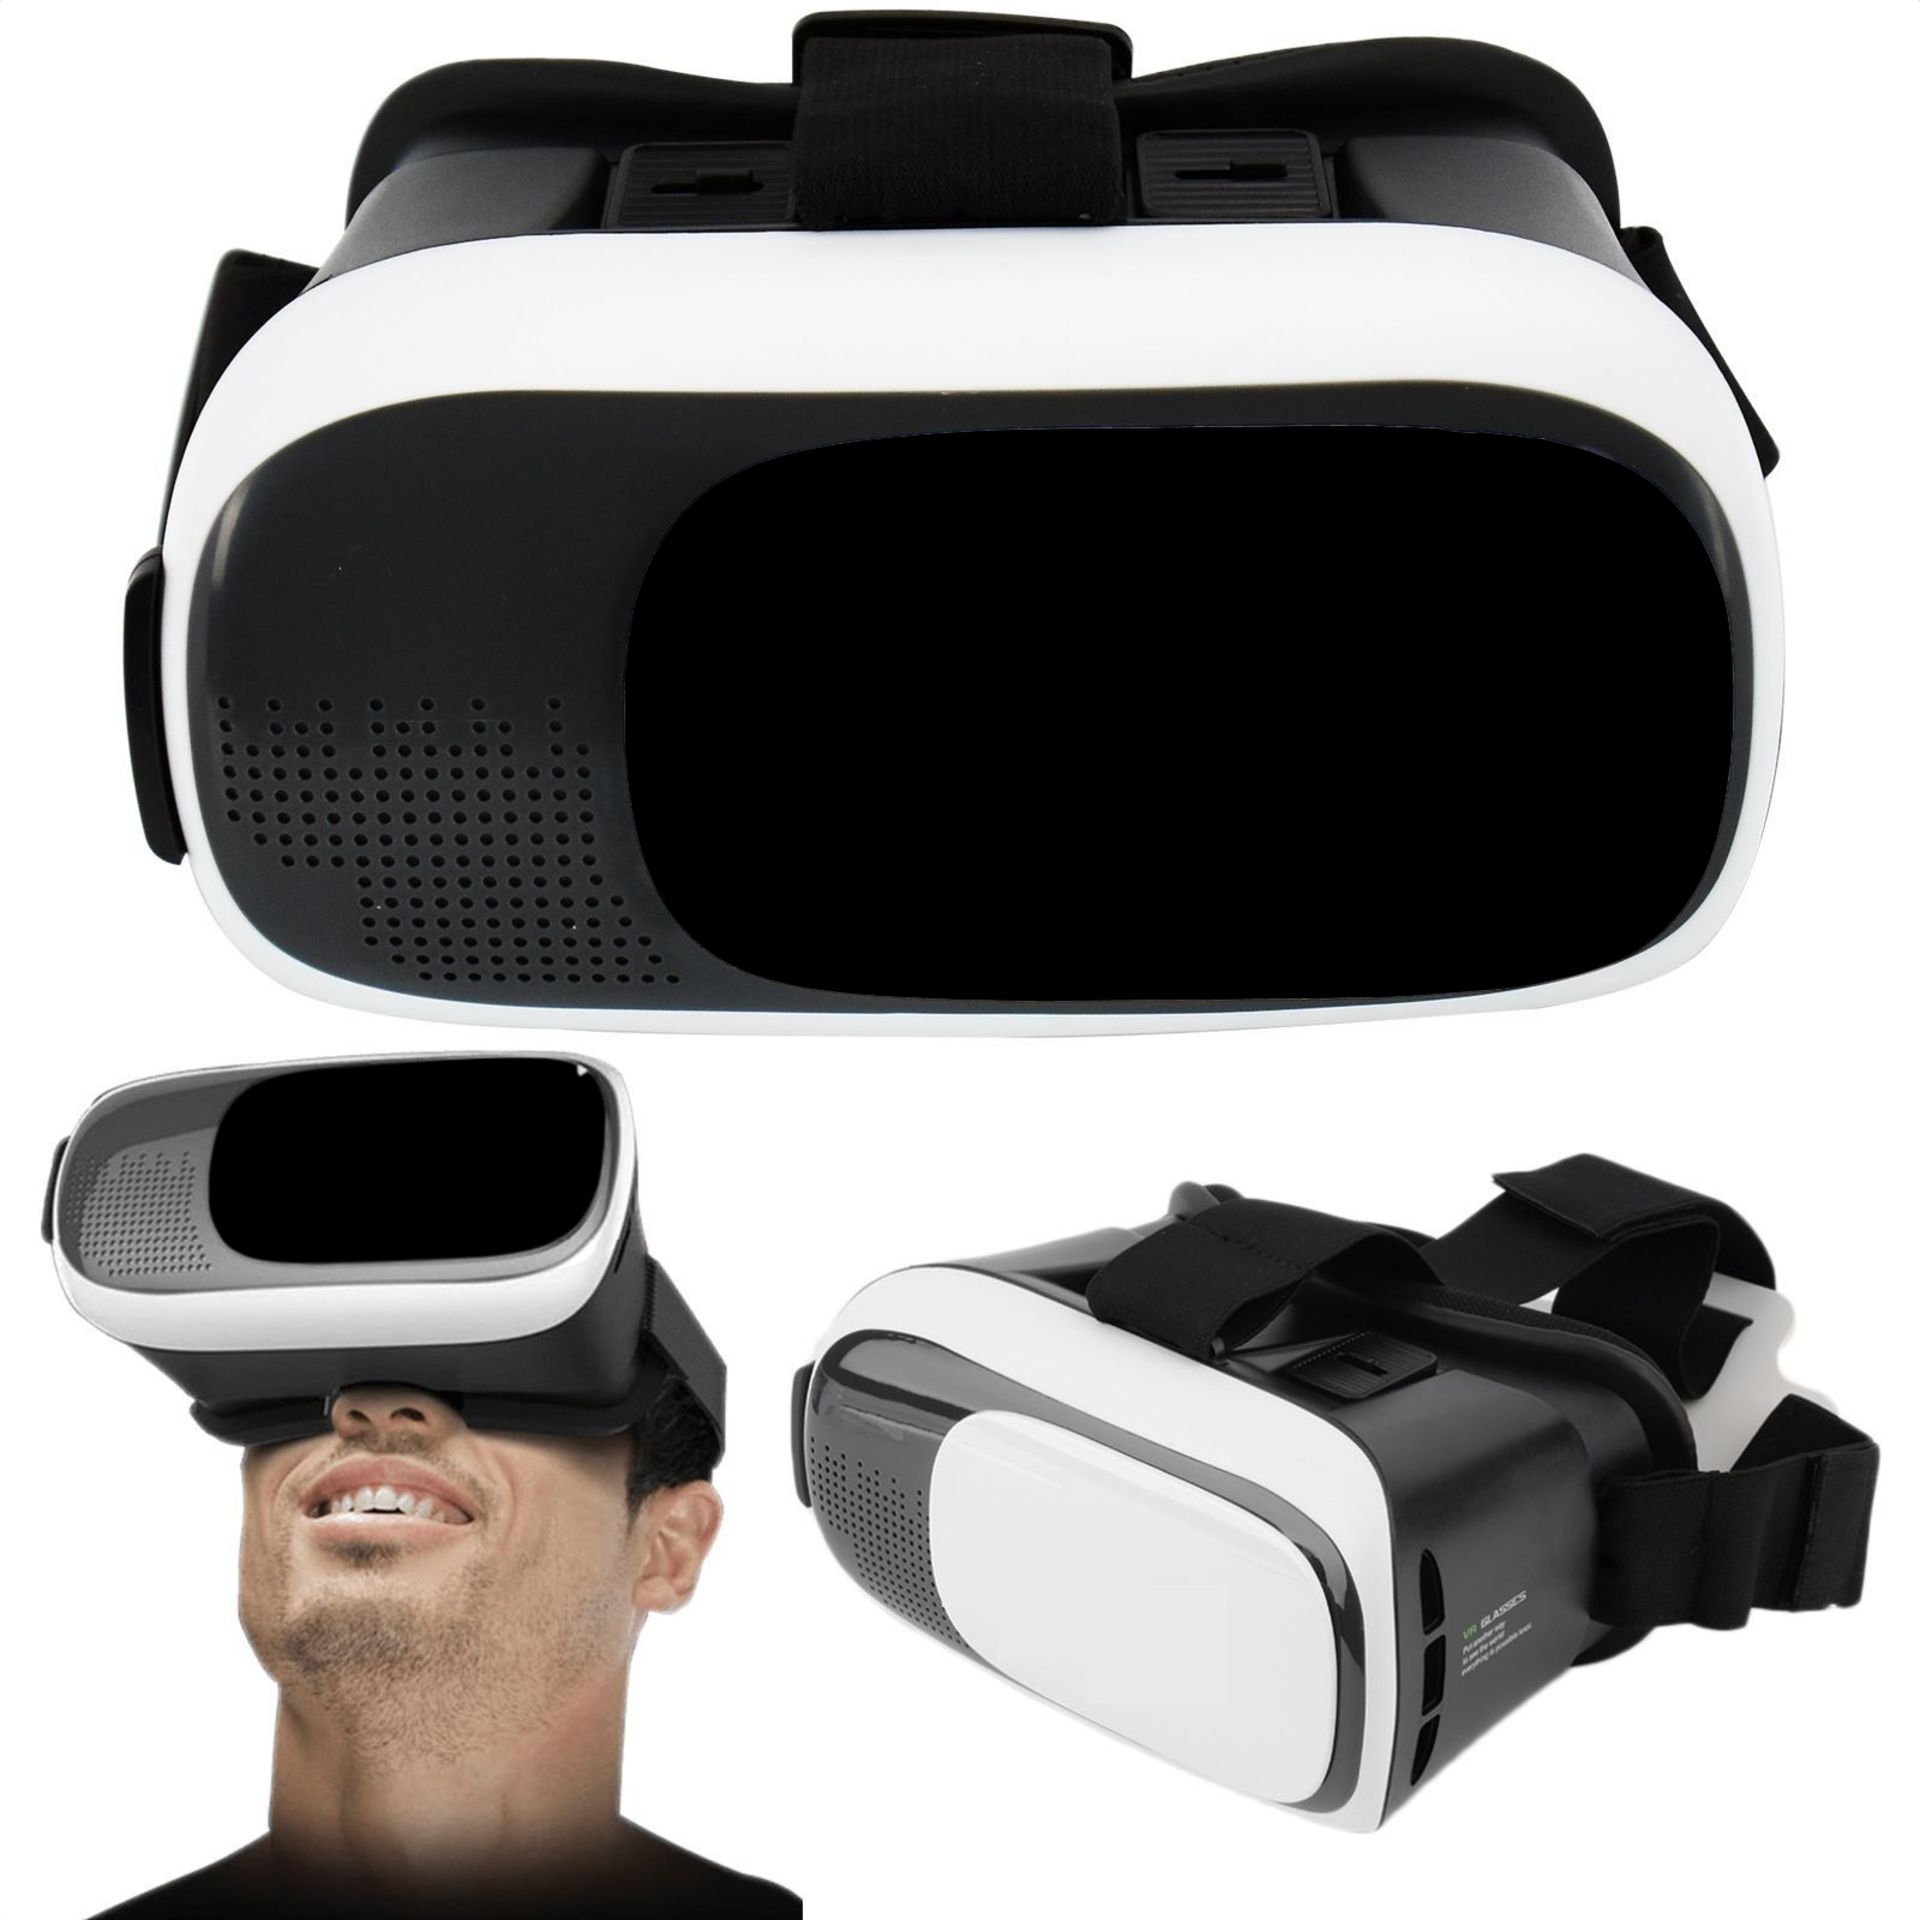 V Brand New VR Virtual Reality Glasses Headset - Padded Section On Goggles - Sliding Viewing Section